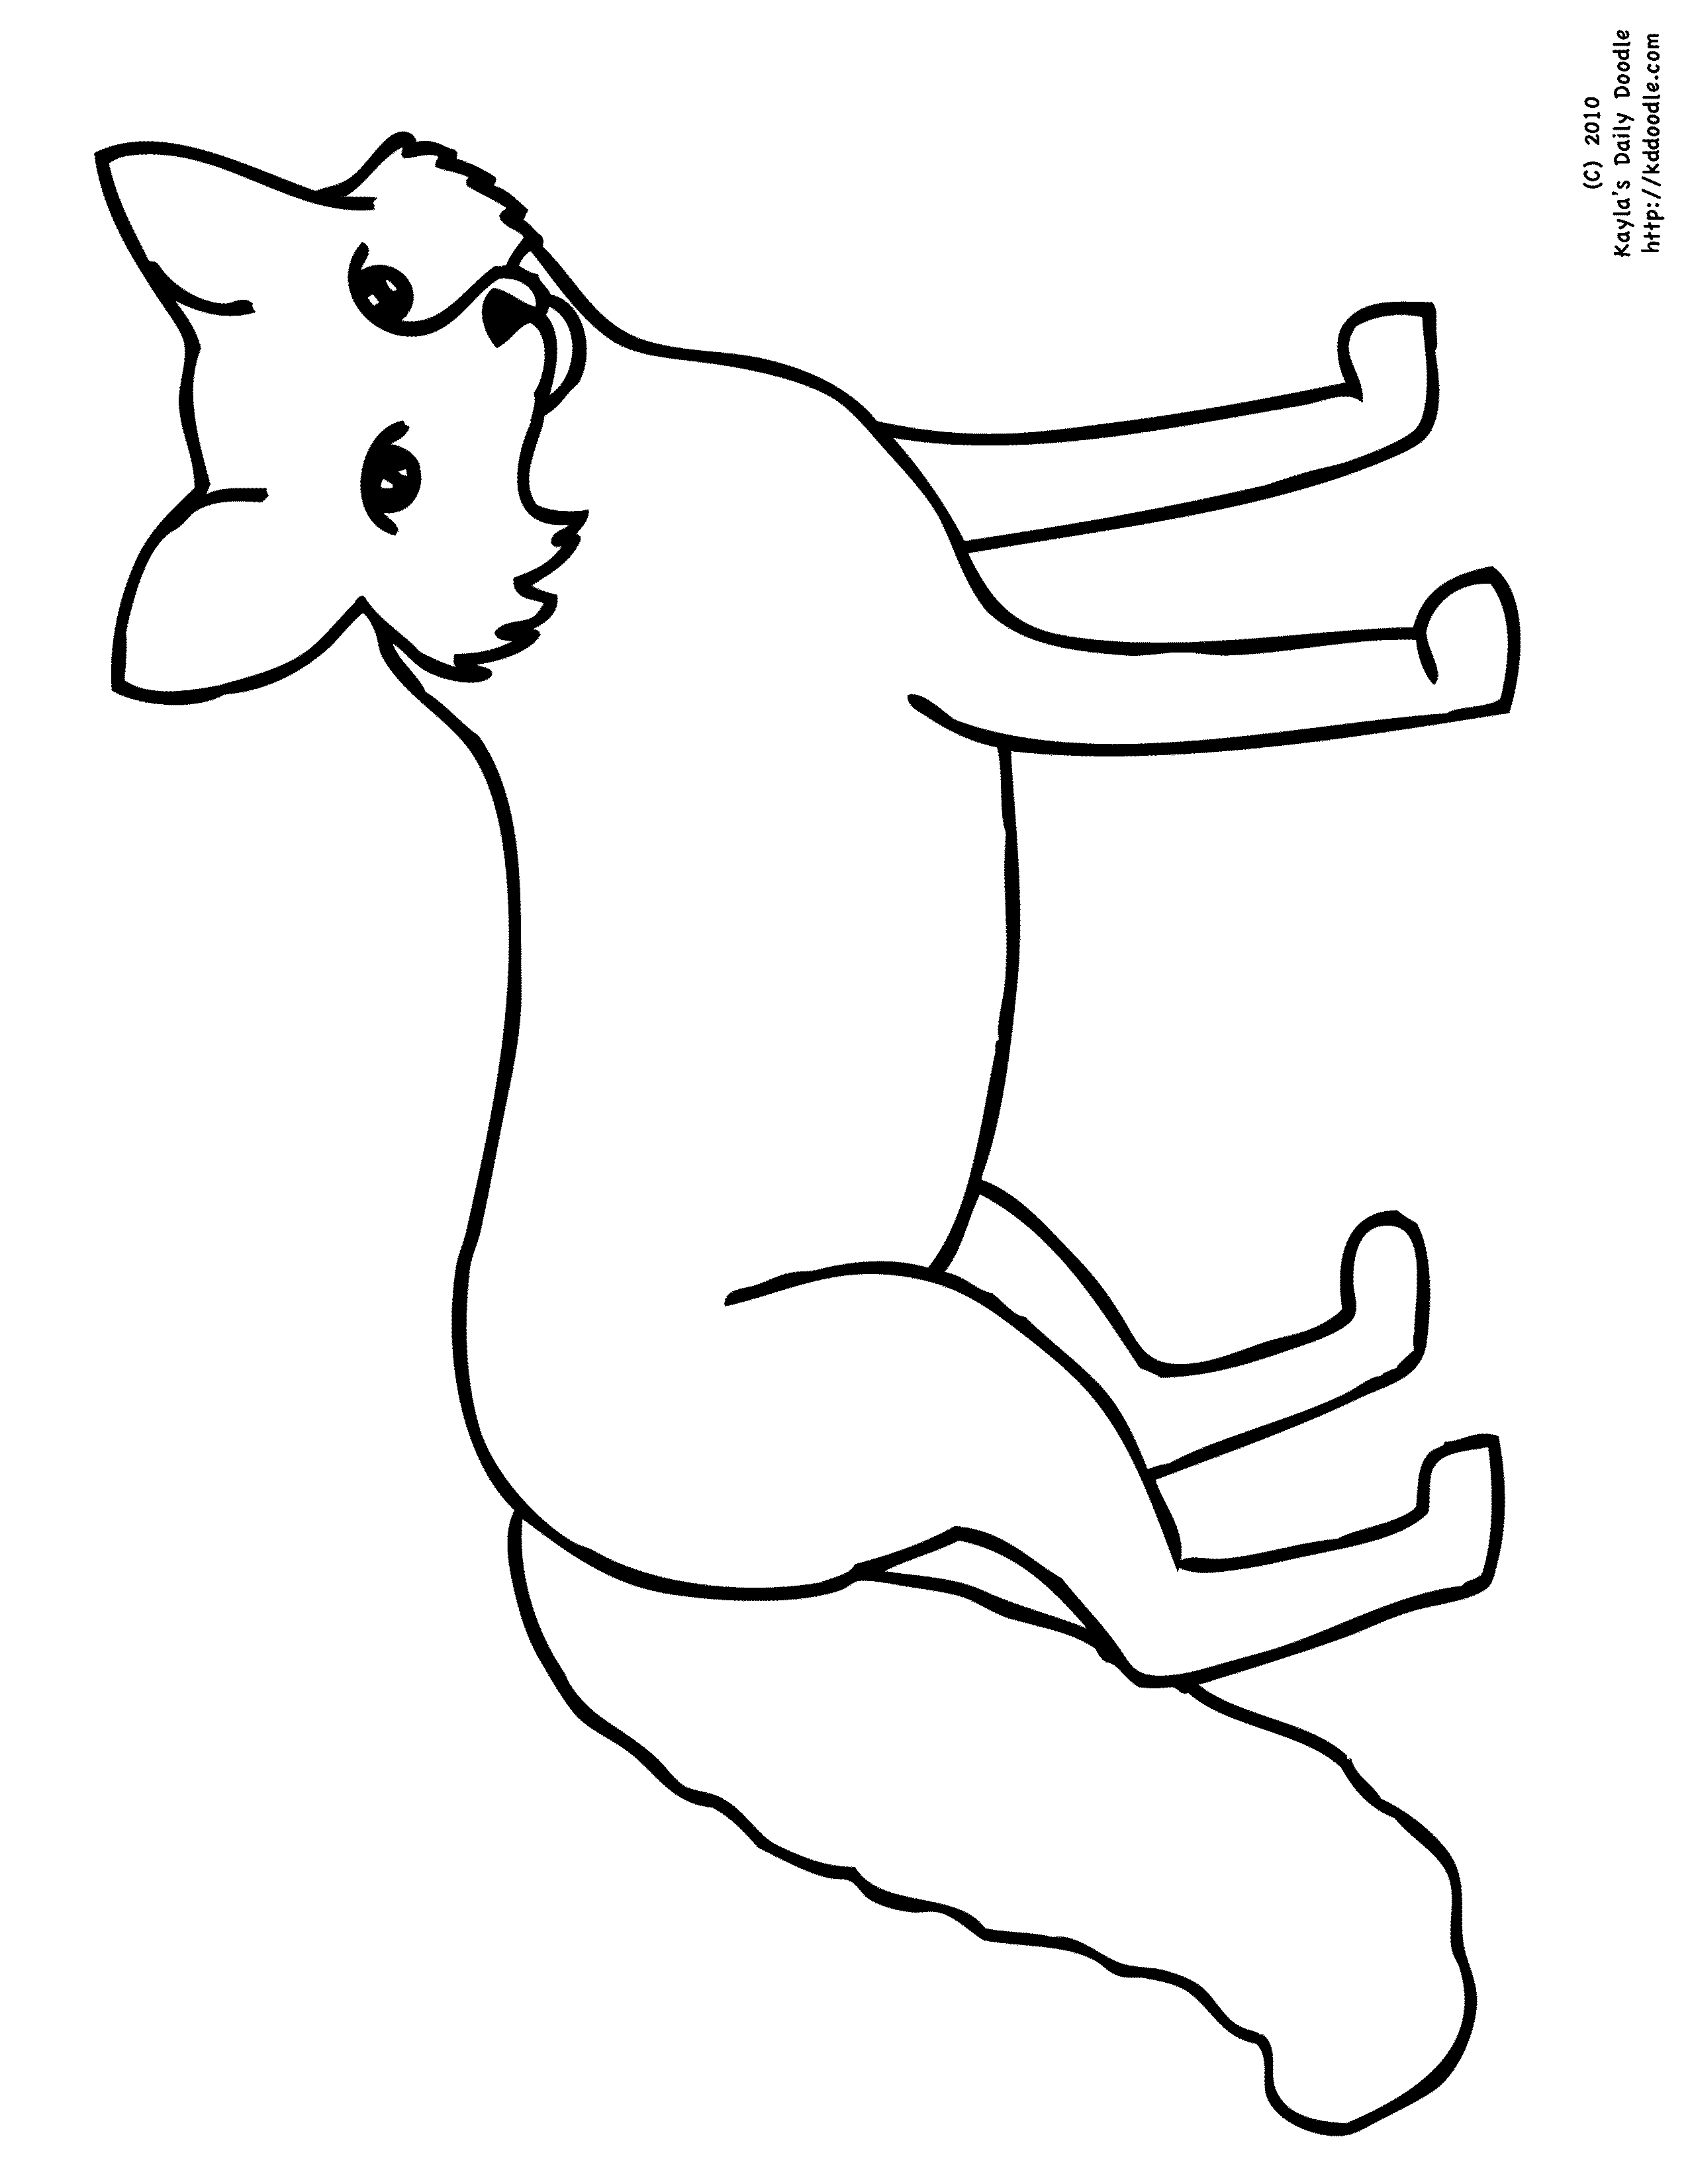 F Is For Fox Coloring Page - Coloring Home